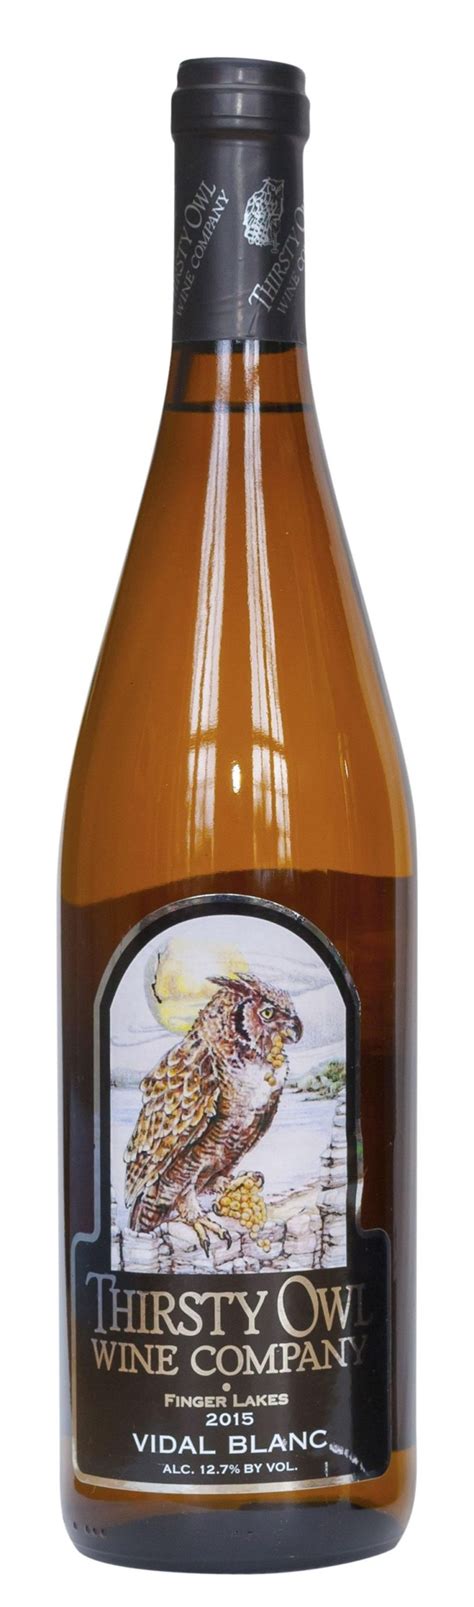 Thirsty Owl Wine Company Vidal Blanc 2015 Wines Out Of The Boxxx